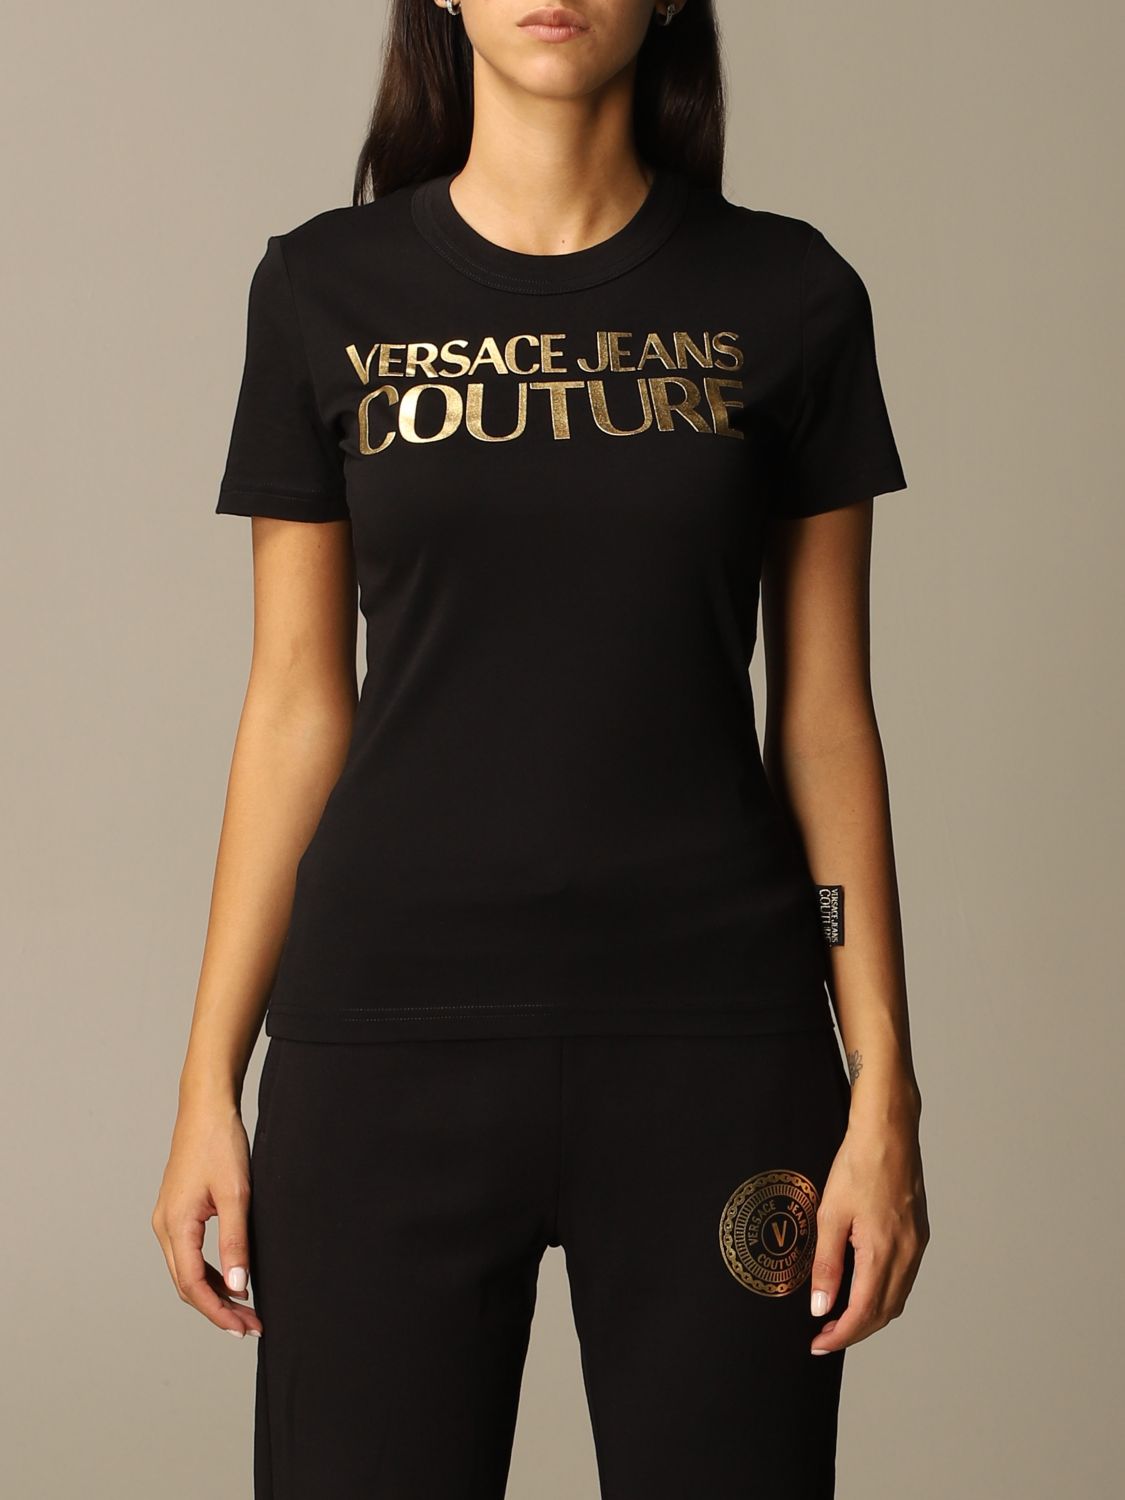 versace jeans couture womens